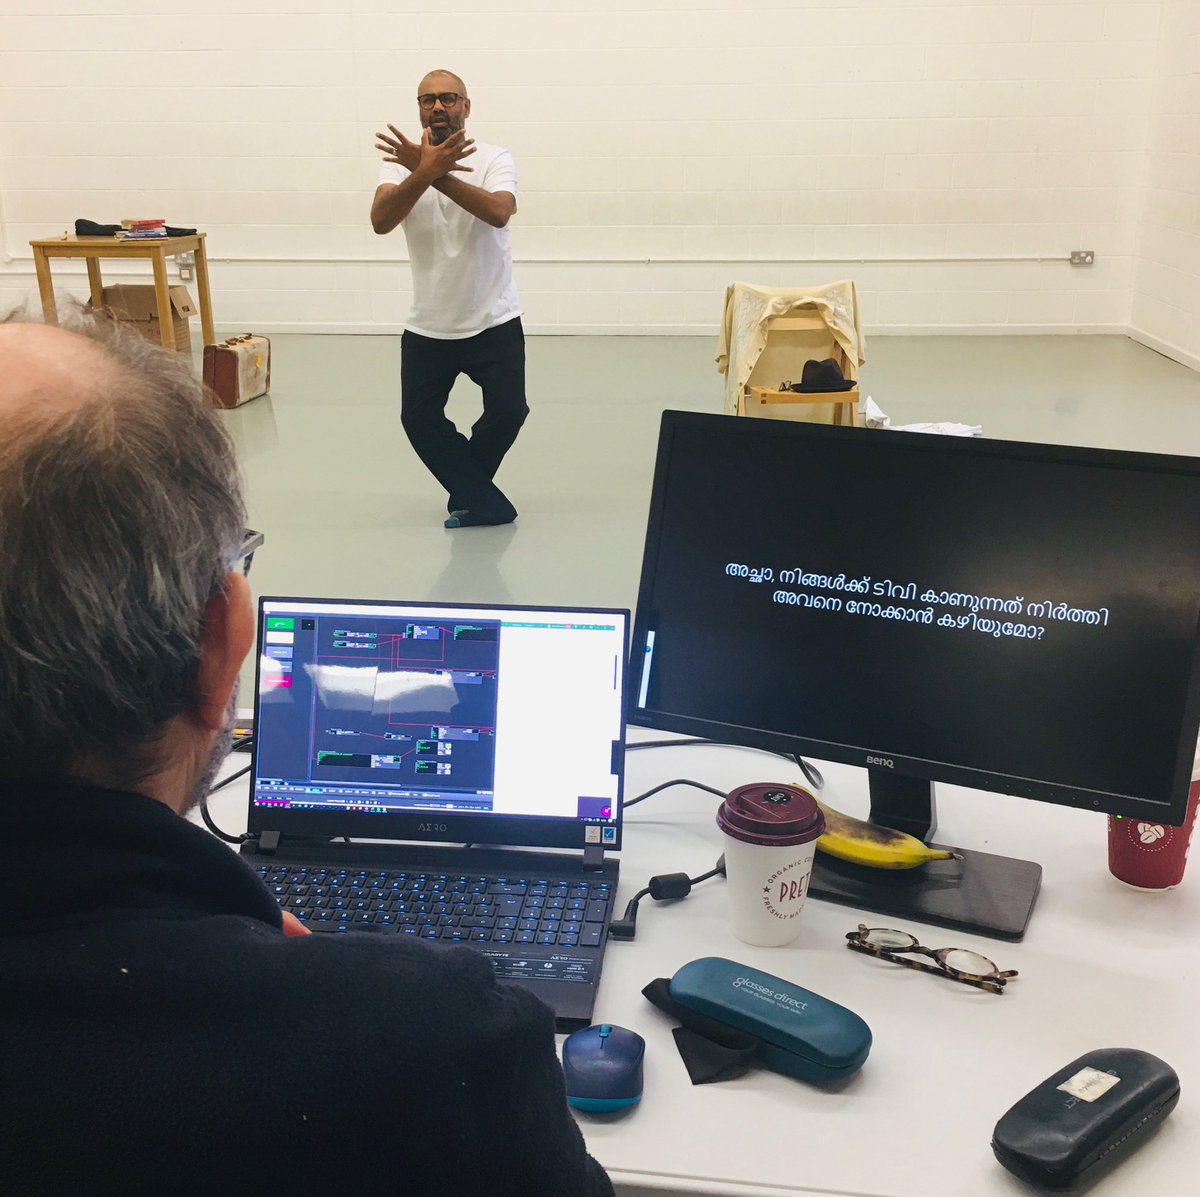 Every performance of Fatherhood includes integral captions created by filmmaker @MarkMorreau to translate the spoken and signed languages in the show as well as describe sounds for Deaf and hard of hearing audiences. #access #accessibility #deaf #captions